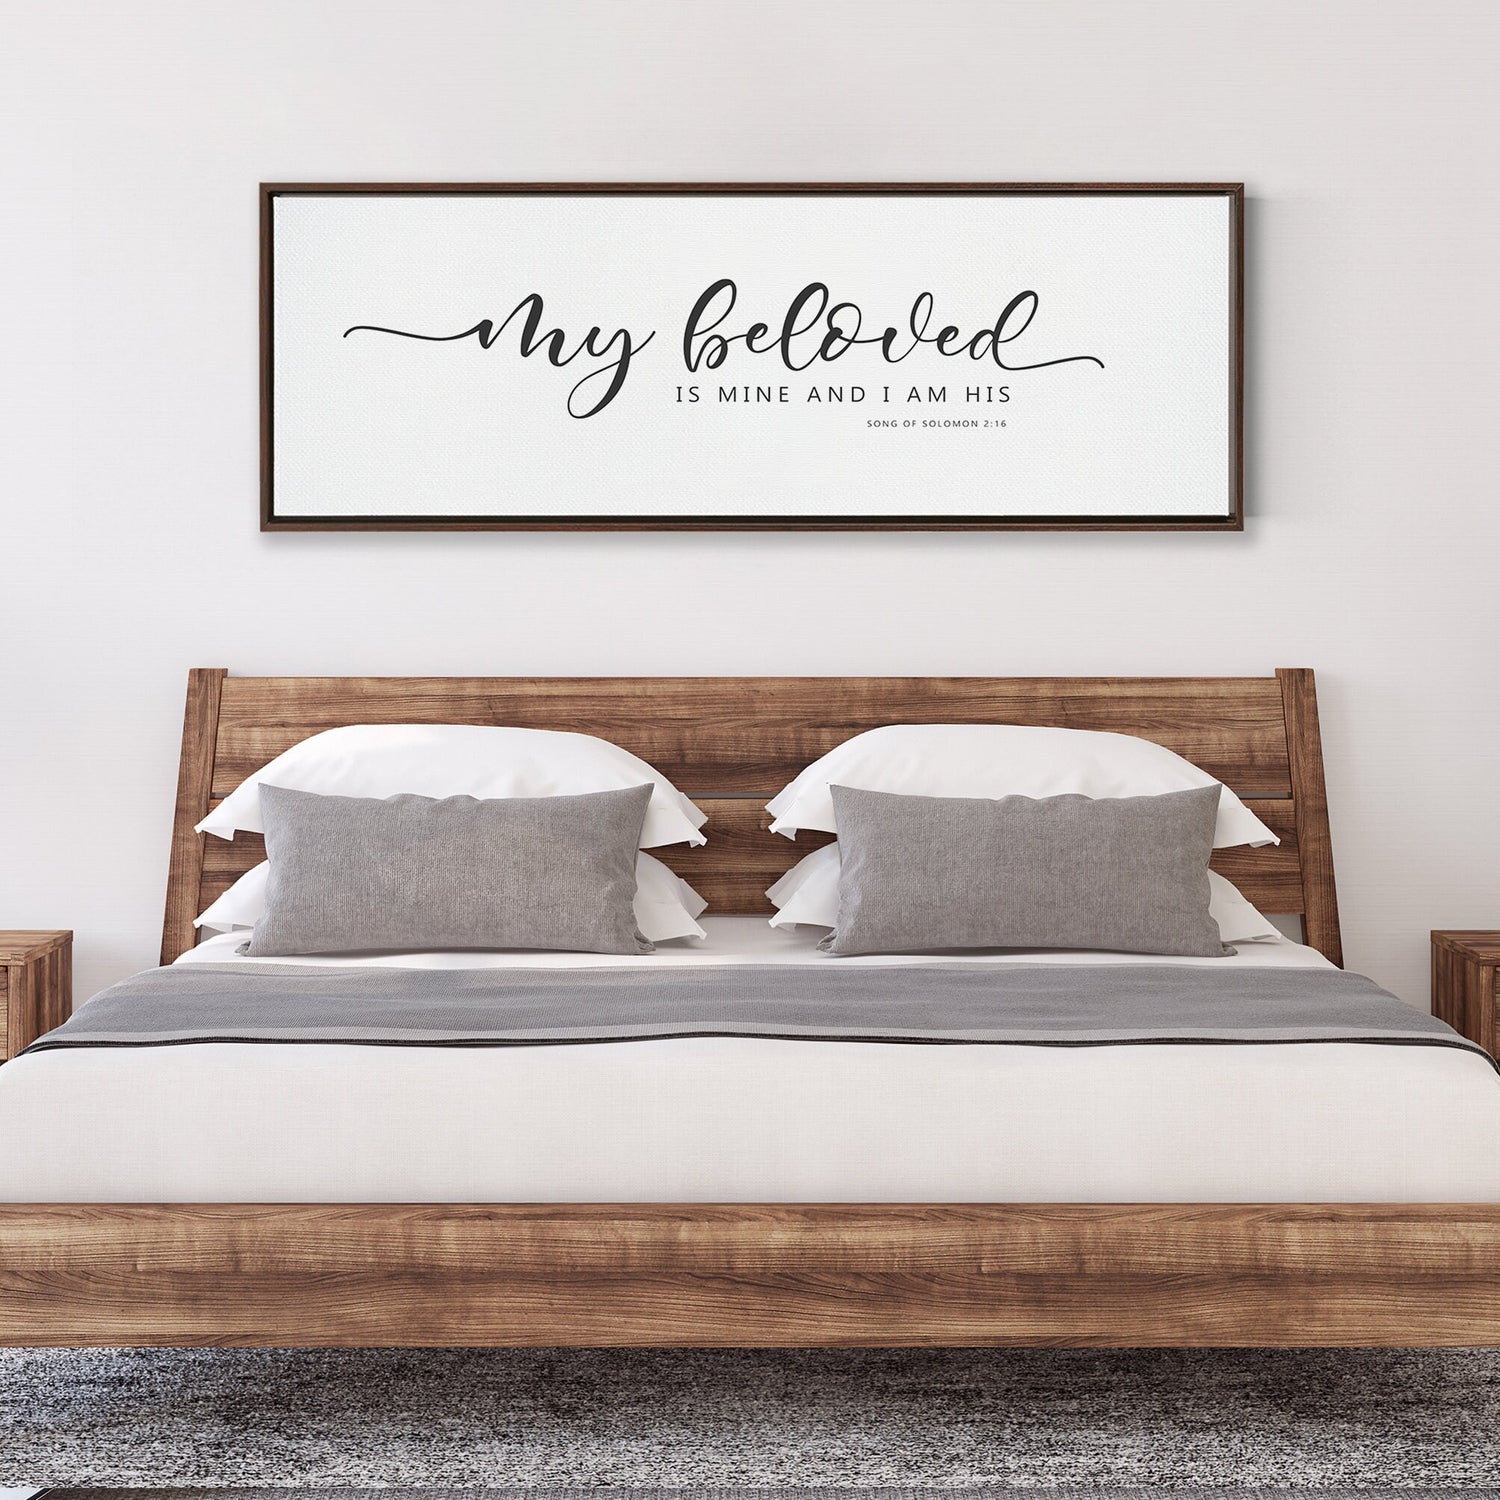 My Beloved Is Mine And I Am His | Scripture Wall Art Sign | Bedroom Home Decor Sign | Song Of Solomon 2:16 | With Frame Options